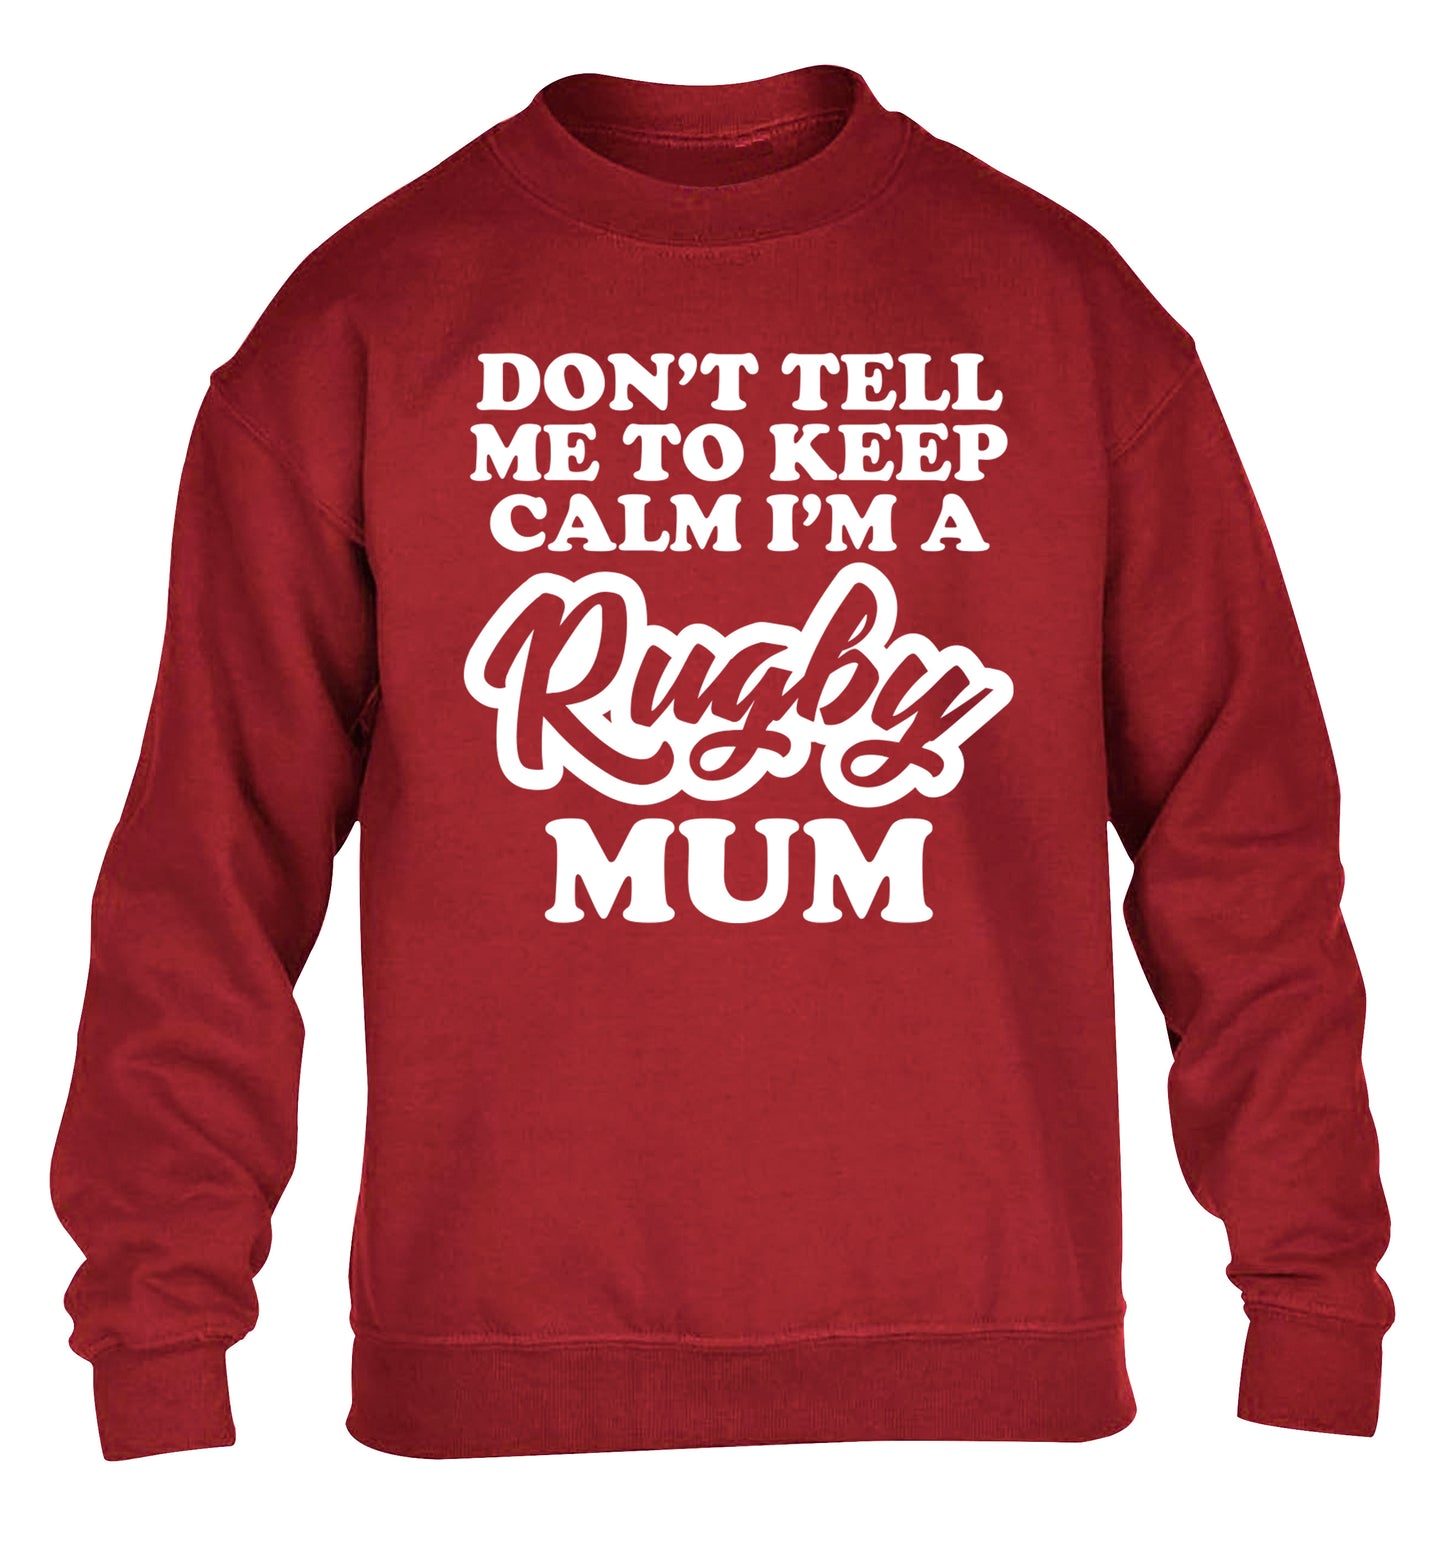 Don't tell me to keep calm I'm a rugby mum children's grey sweater 12-13 Years